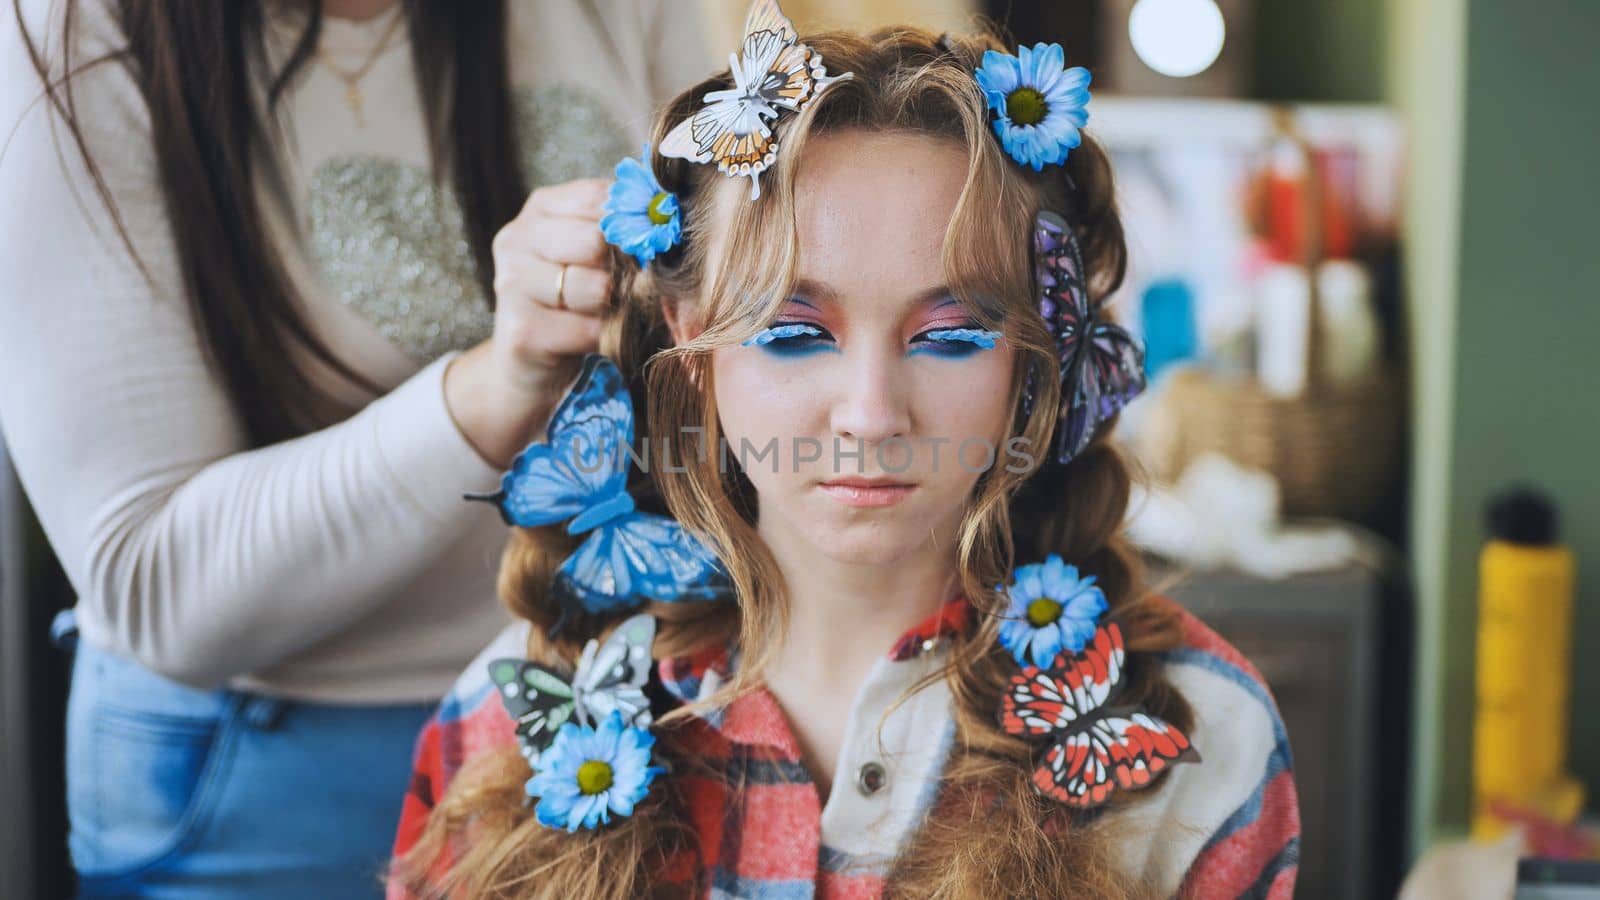 The hairdresser decorates the model's hair with blue flowers and butterflies